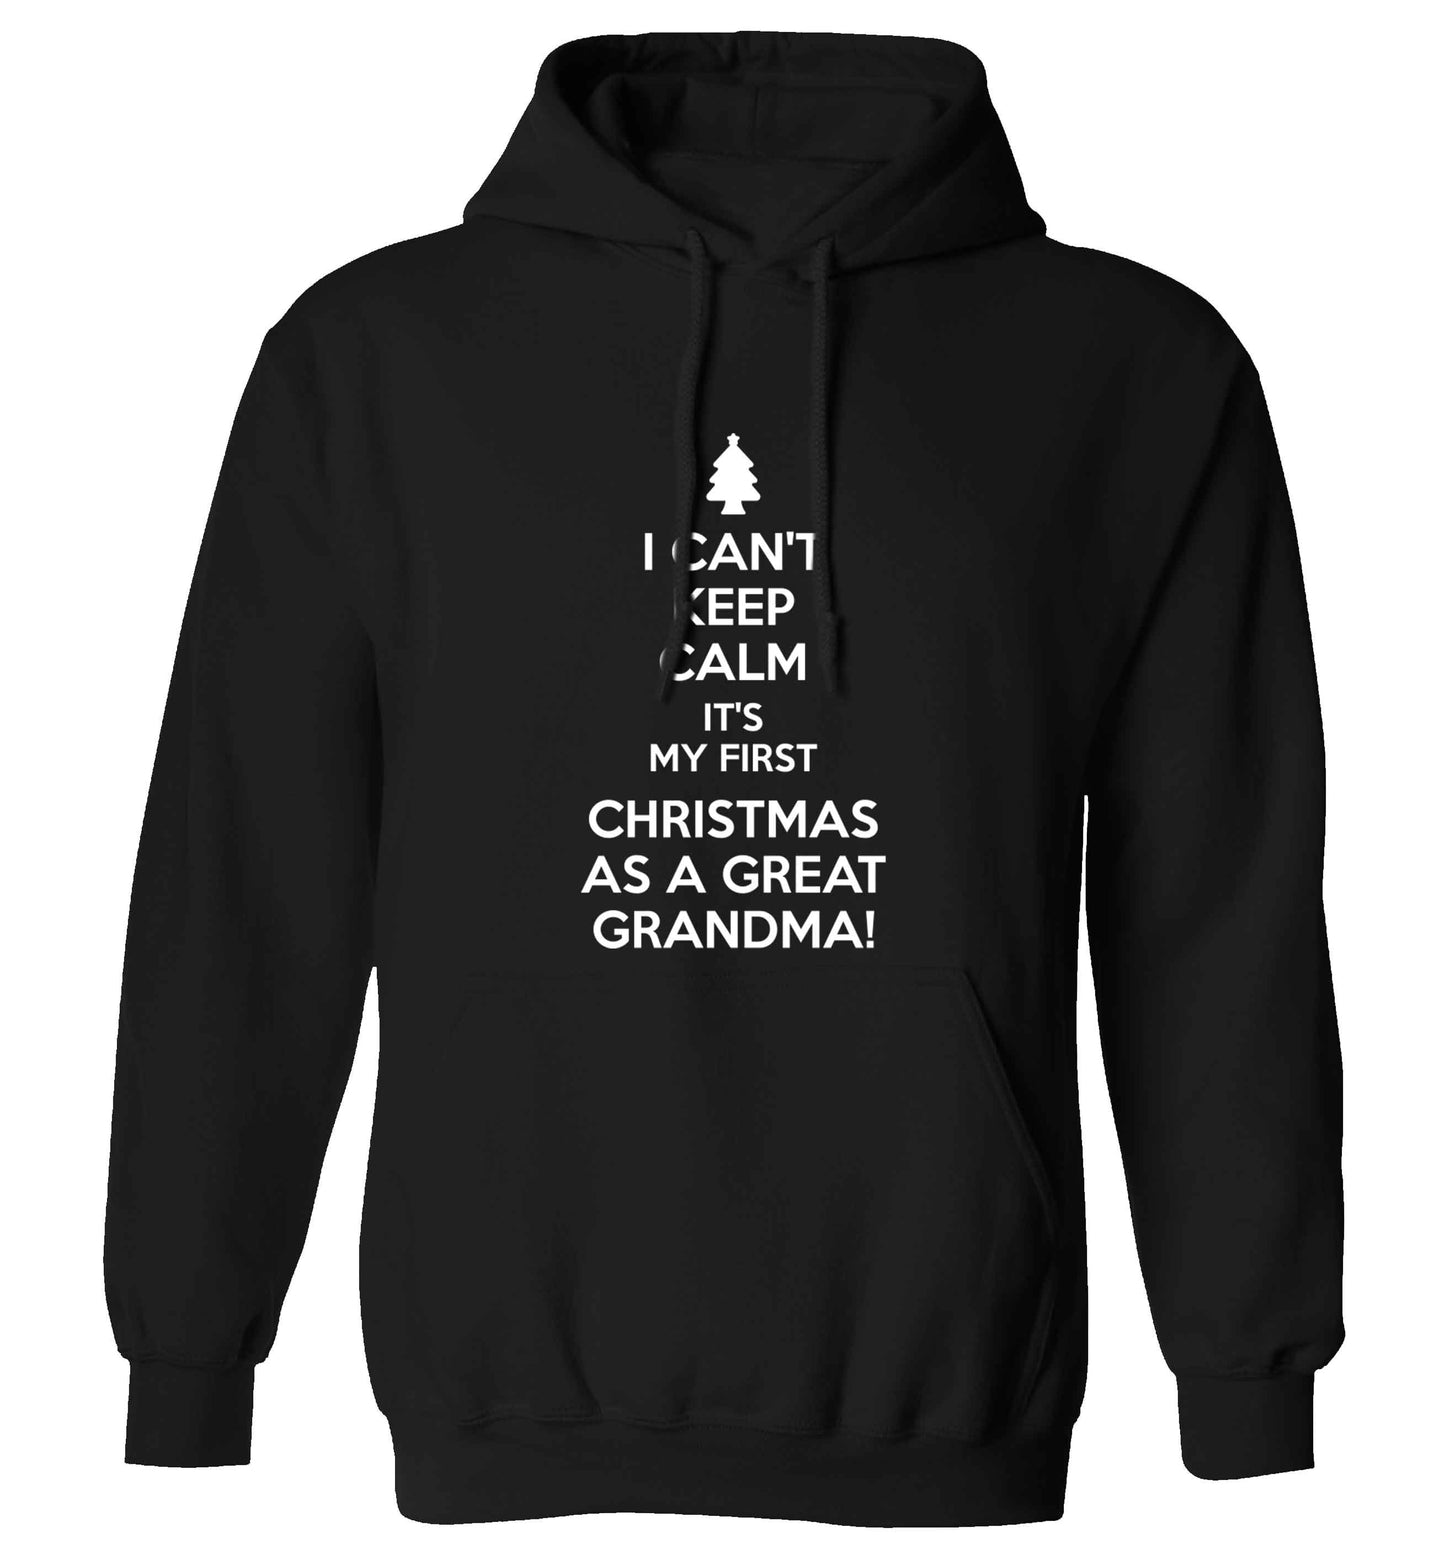 I can't keep calm it's my first Christmas as a great grandma! adults unisex black hoodie 2XL